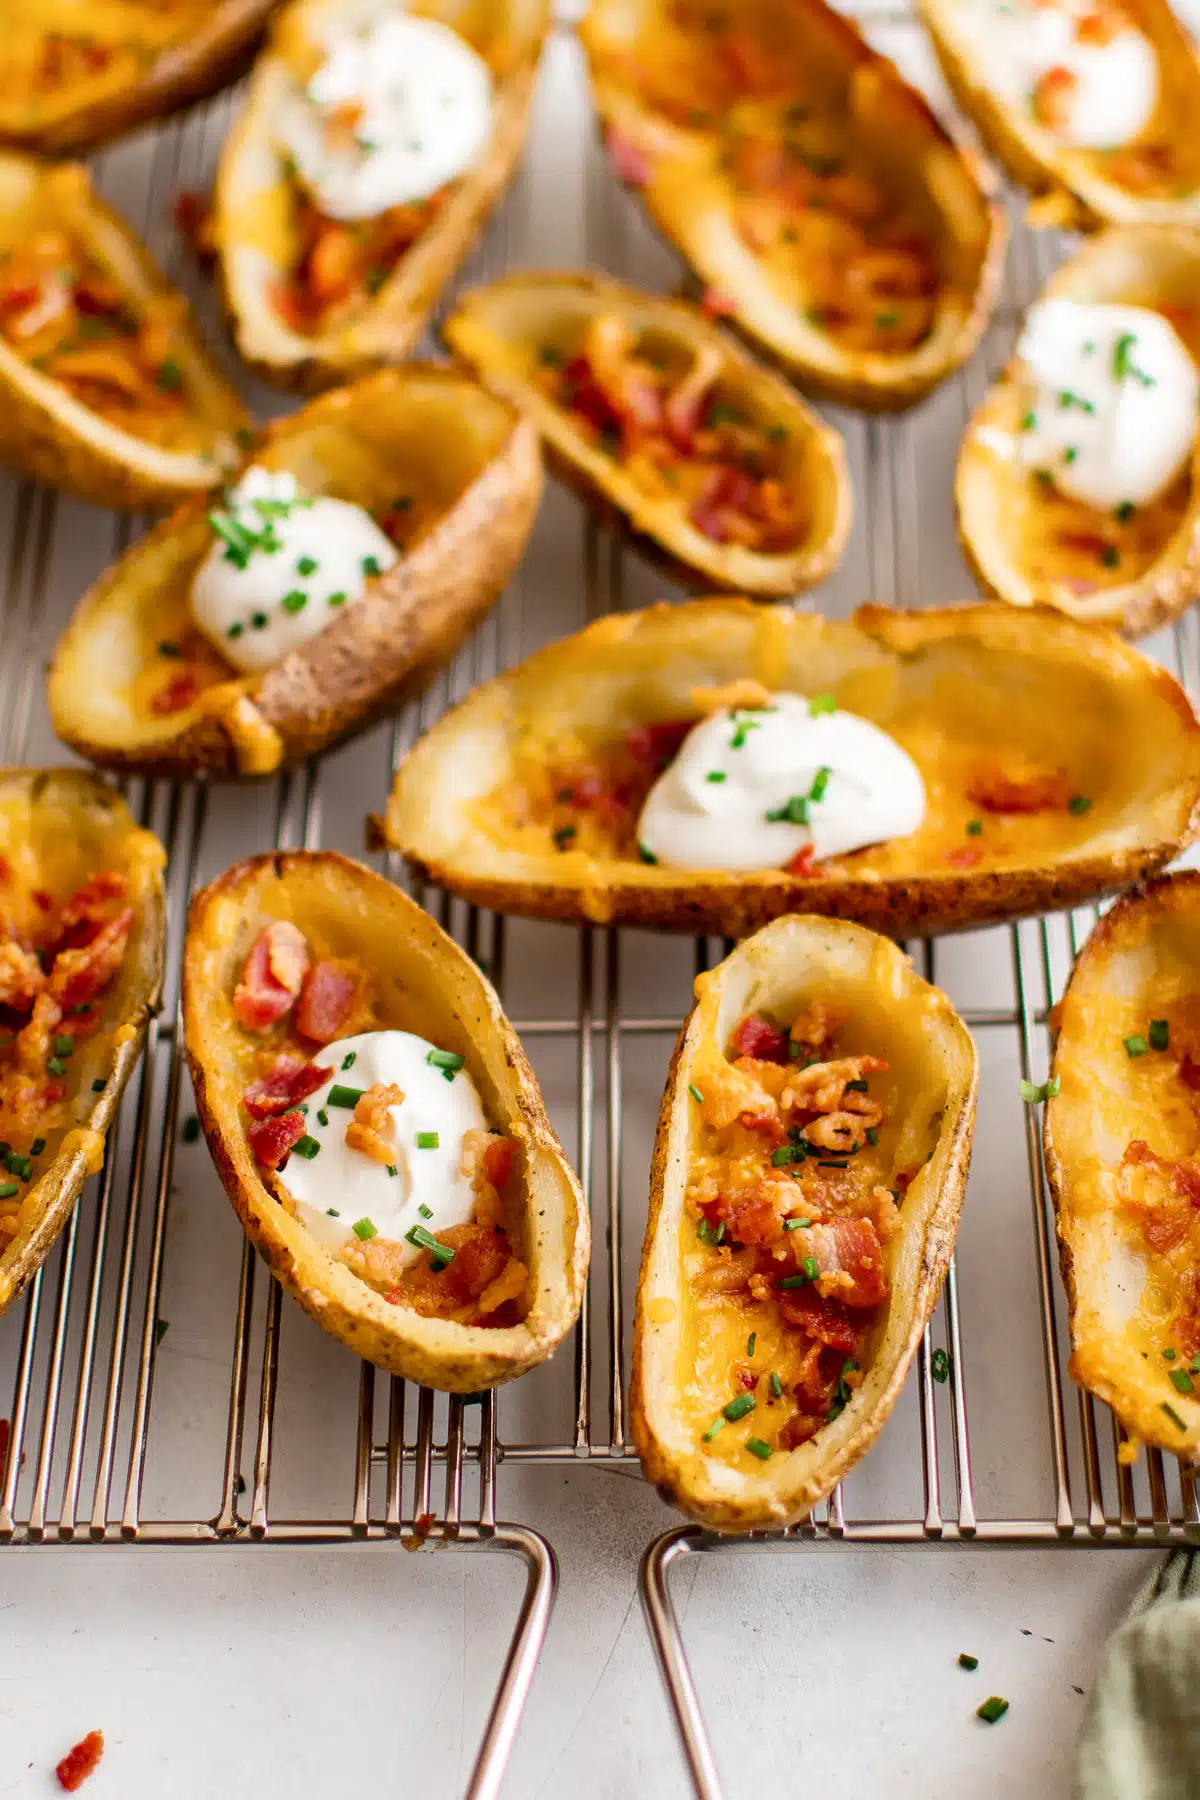 Potato skins filled with cheese, bacon, chives, and some with sour cream on a wire cooking rack.